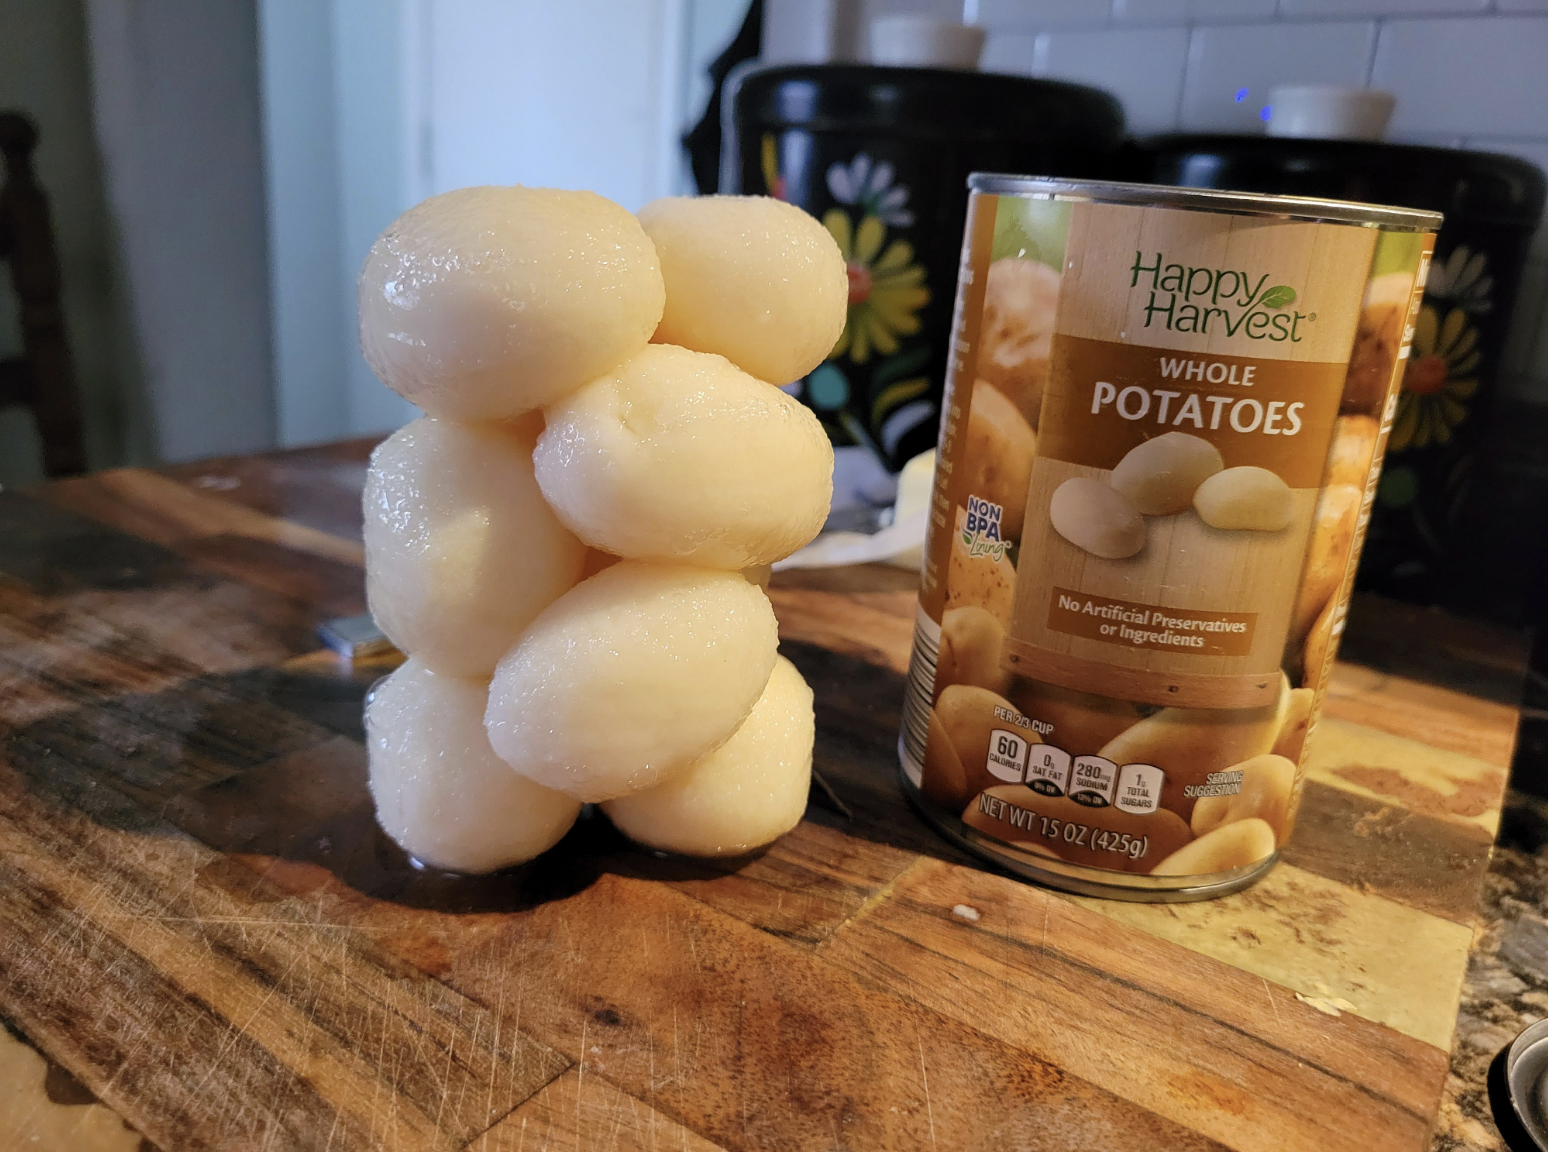 A stacked whole canned potatoes next to its container on a kitchen counter